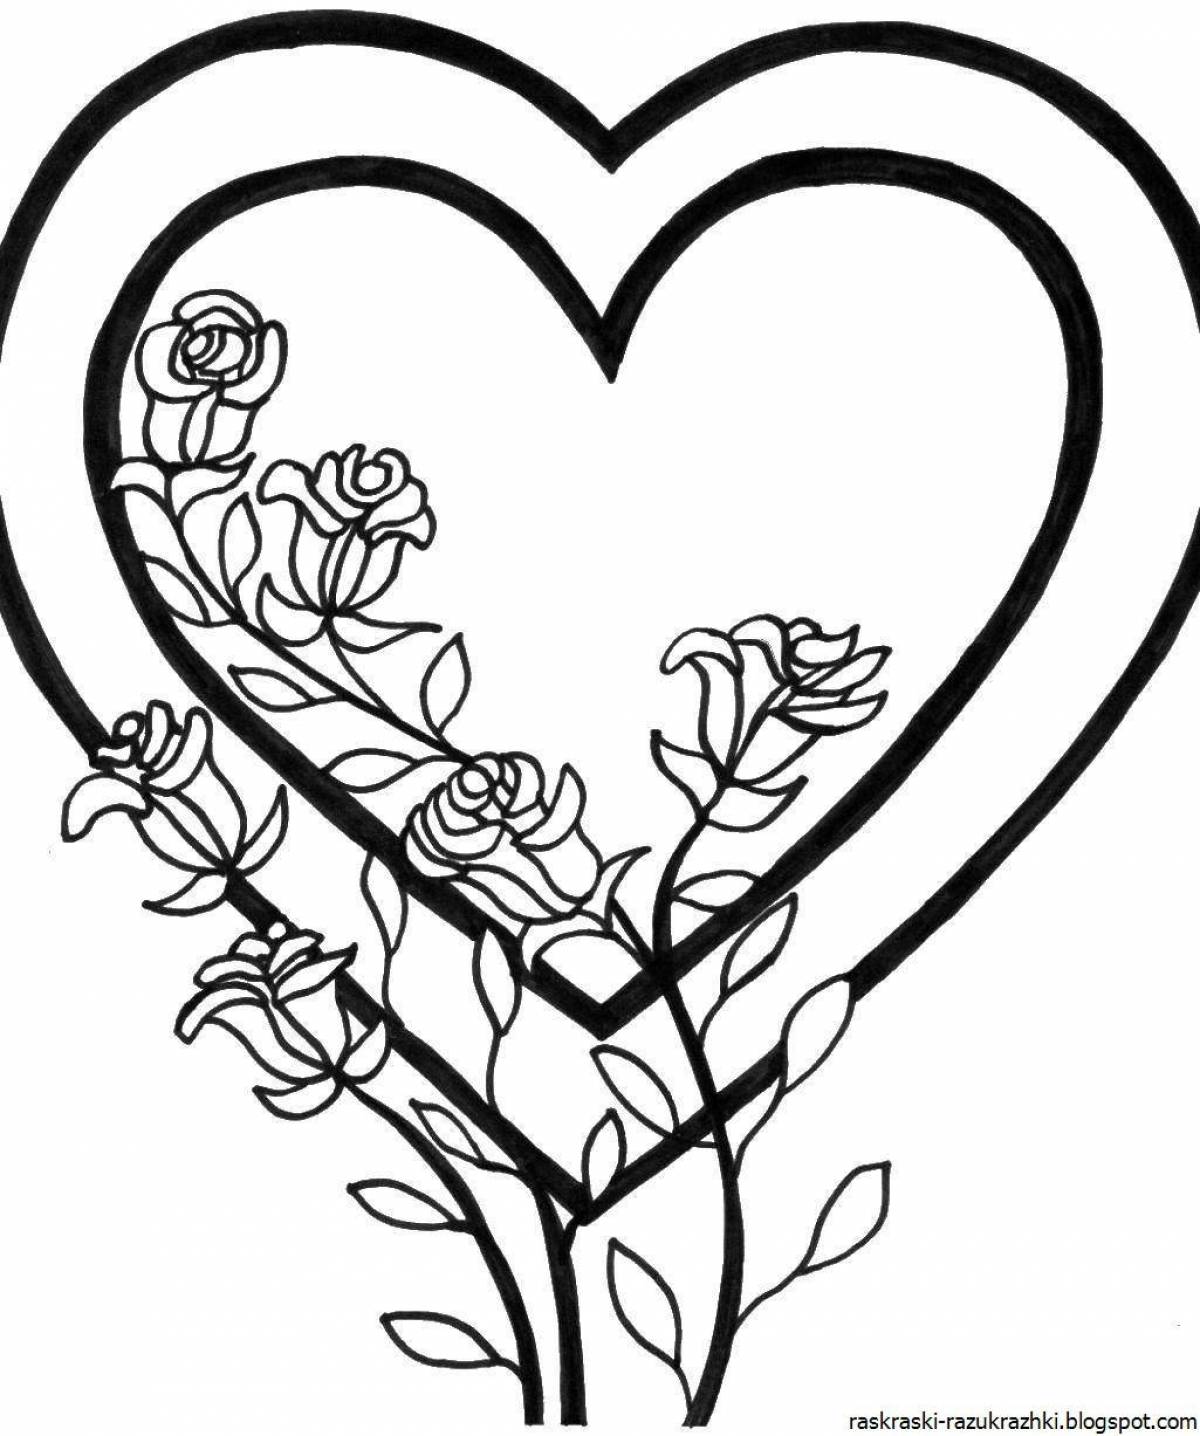 Delightful easy coloring pages